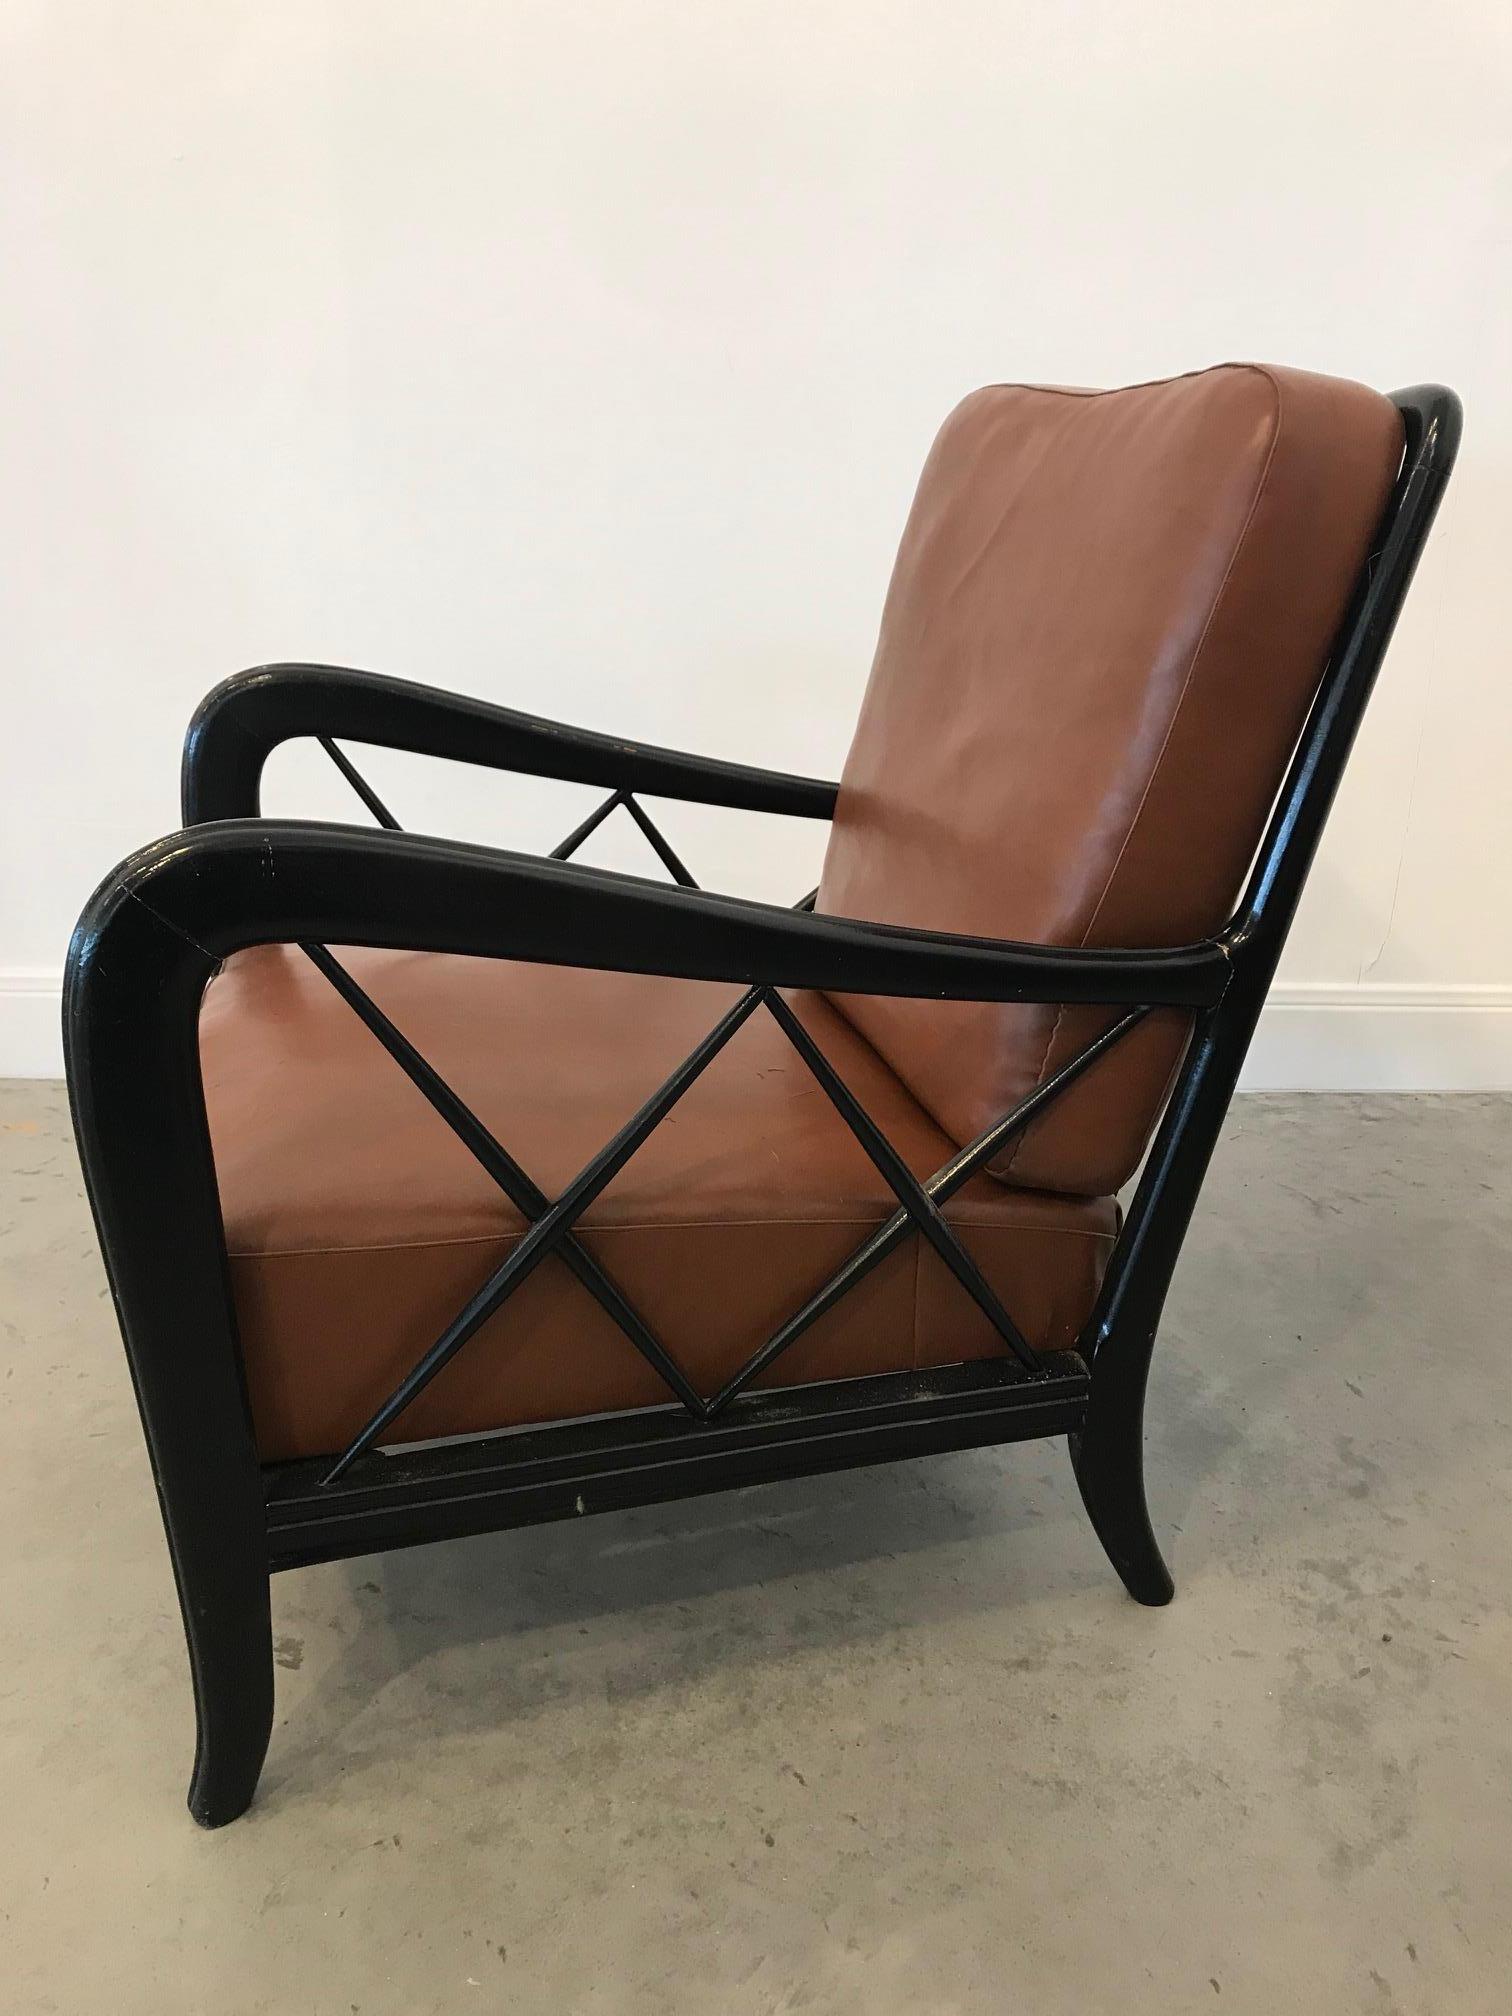 These 1940s armchairs fit perfectly as a pair of parlour or reading lounge chairs. The brick brown leather cushions are very comfortable and sit on a frame that is painted in a semi-glossy black lacquer.